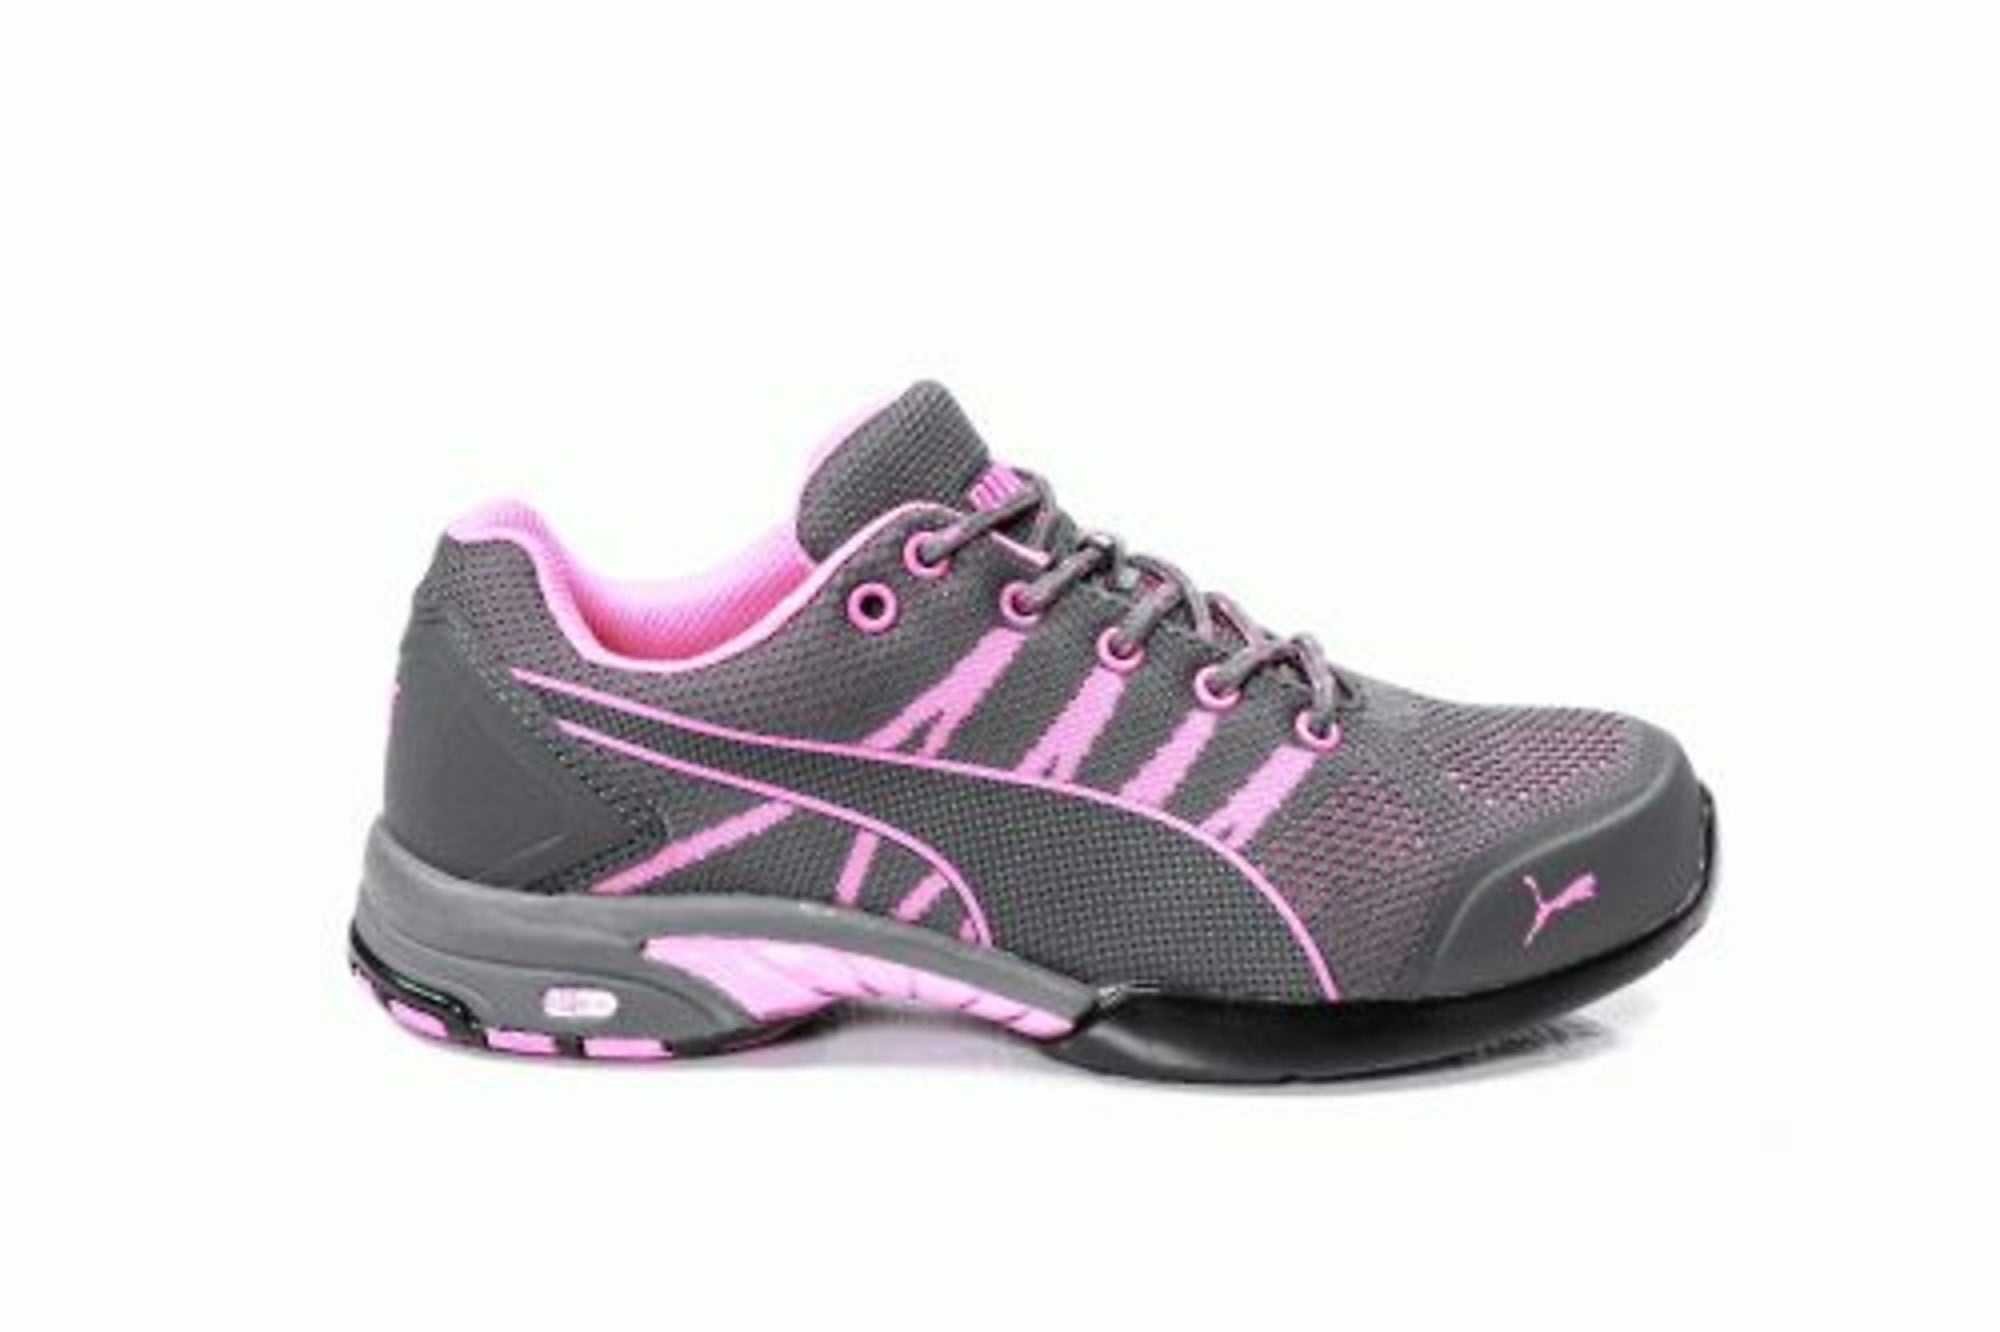 puma safety shoes for women